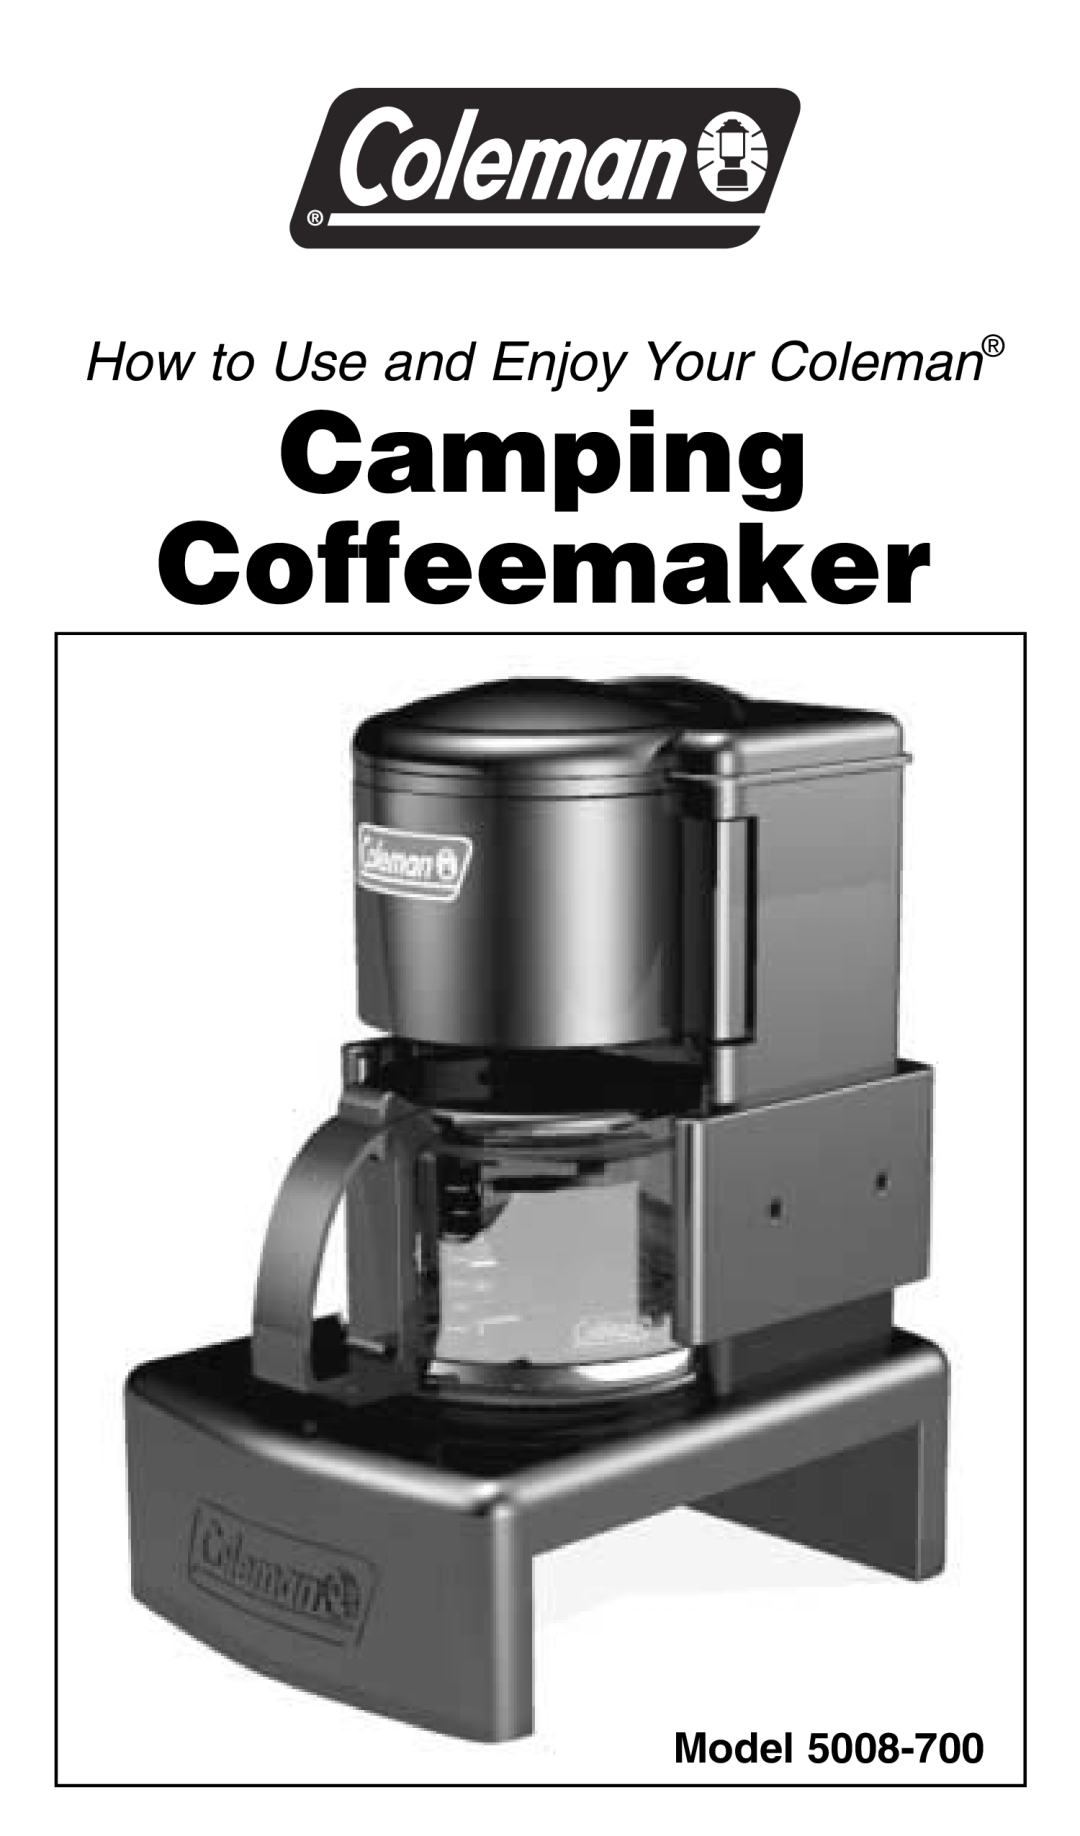 Coleman Model 5008-700 manual Camping Coffeemaker, How to Use and Enjoy Your Coleman 